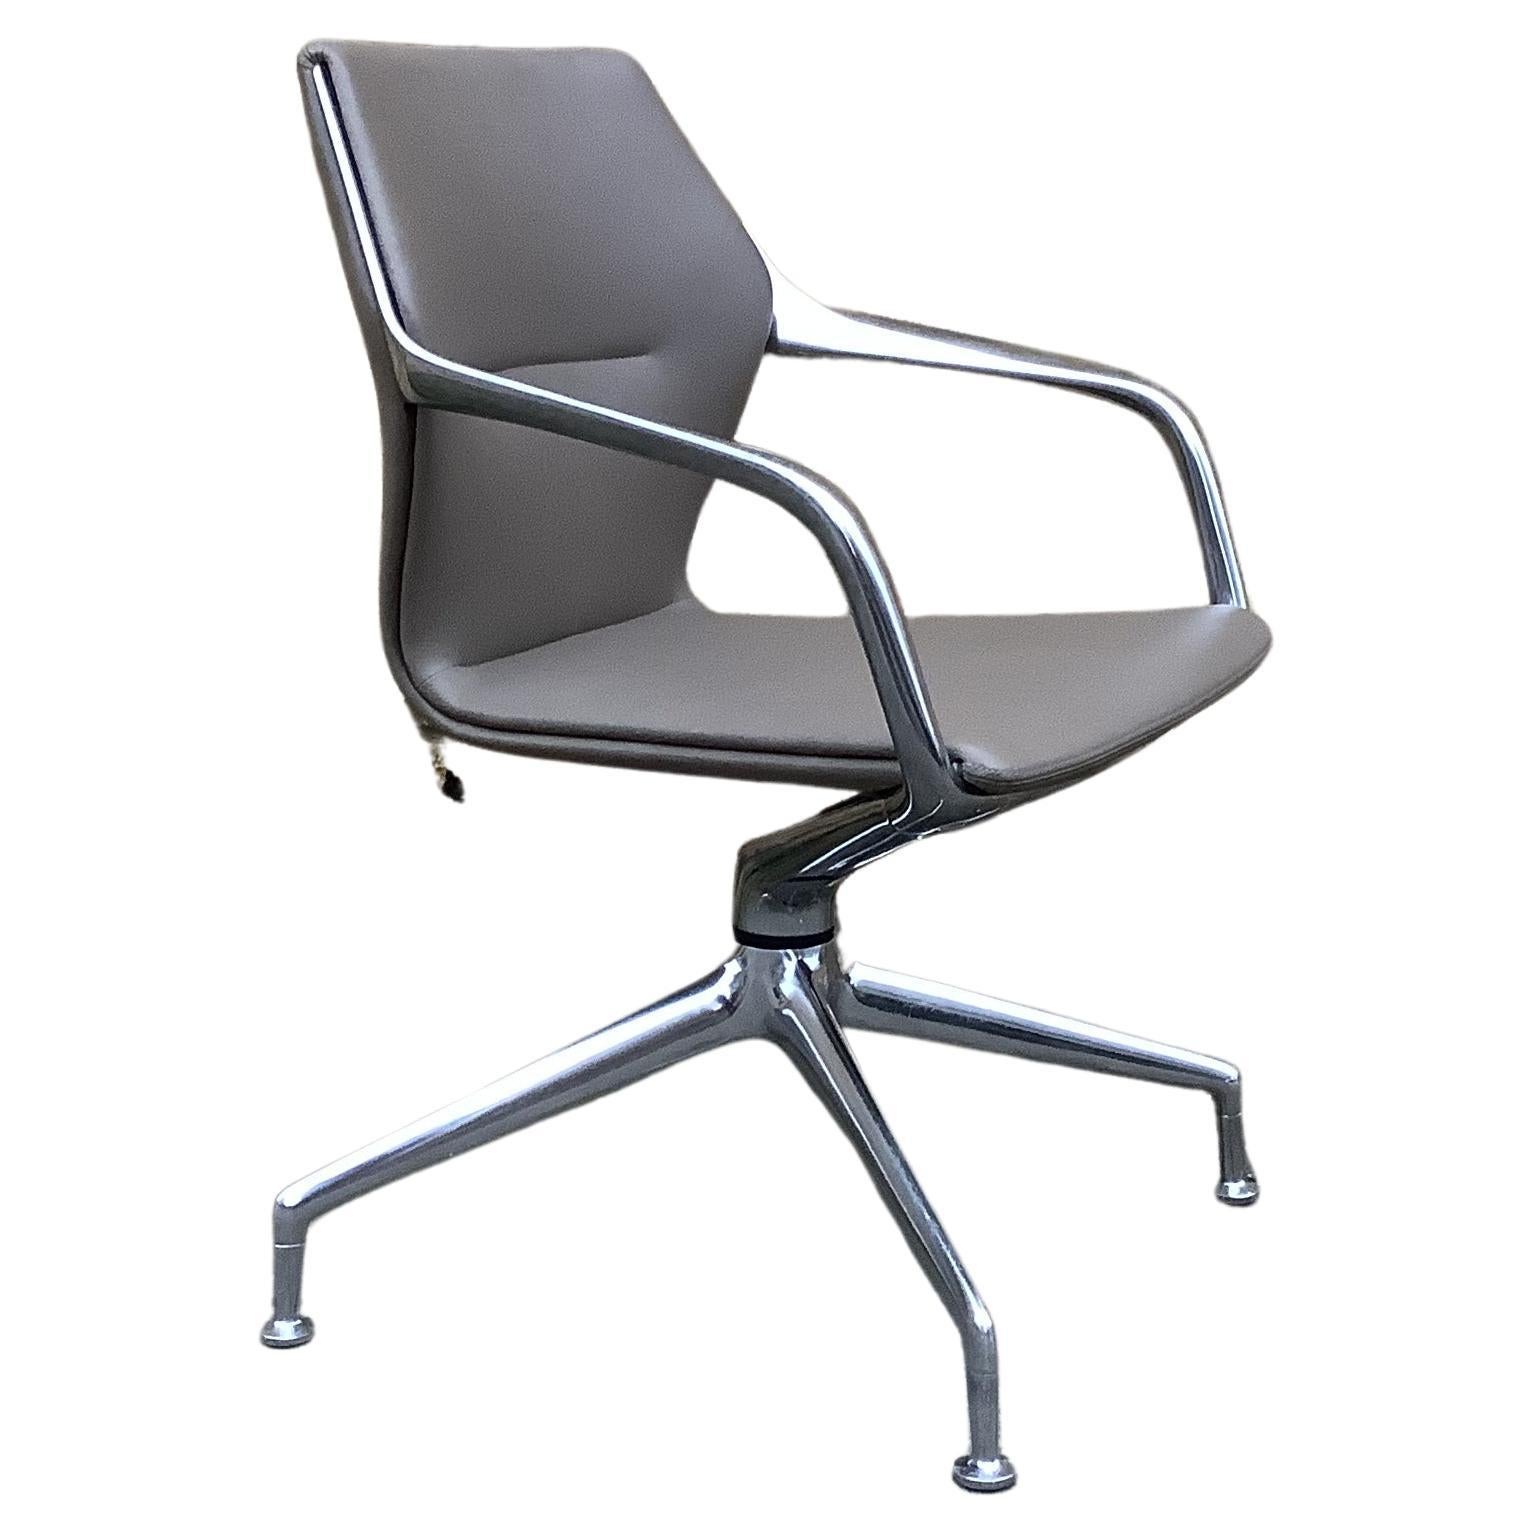 A Ray Office Chairs by Brunner  designer Jehs+laub